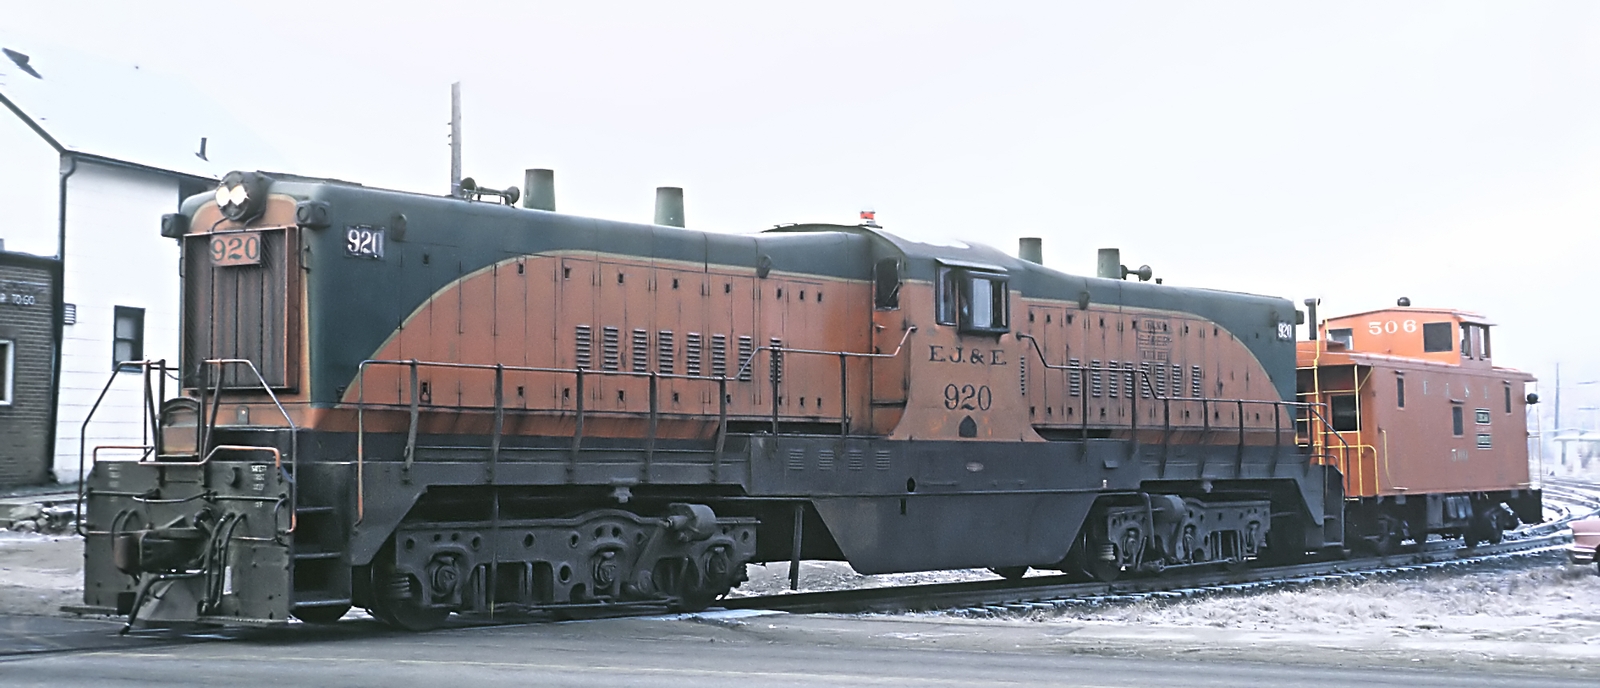 Elgin, Joliet & Eastern Railway No. 920 in January 1965 at Griffith, Indiana